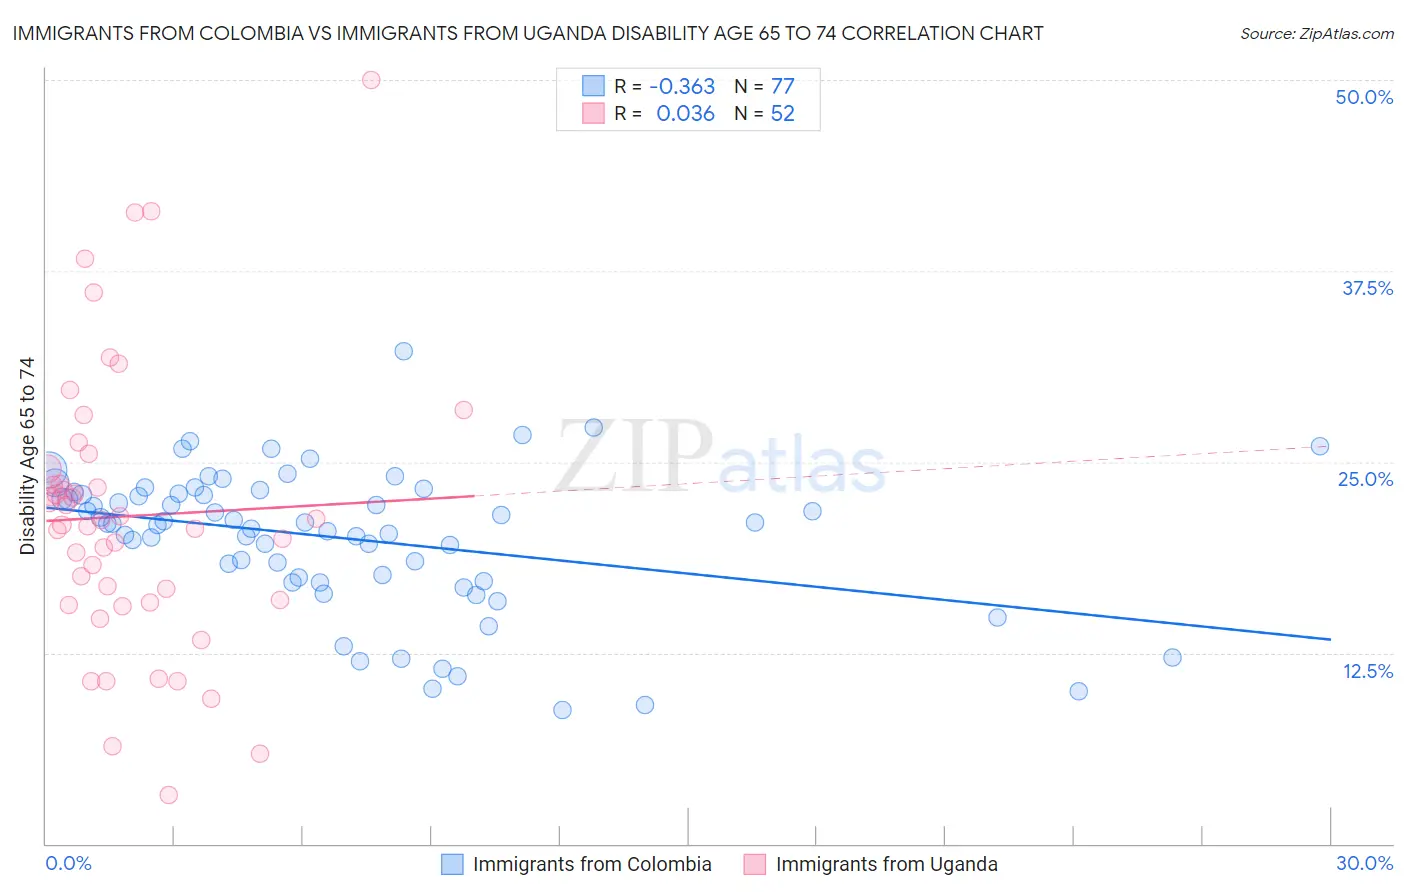 Immigrants from Colombia vs Immigrants from Uganda Disability Age 65 to 74